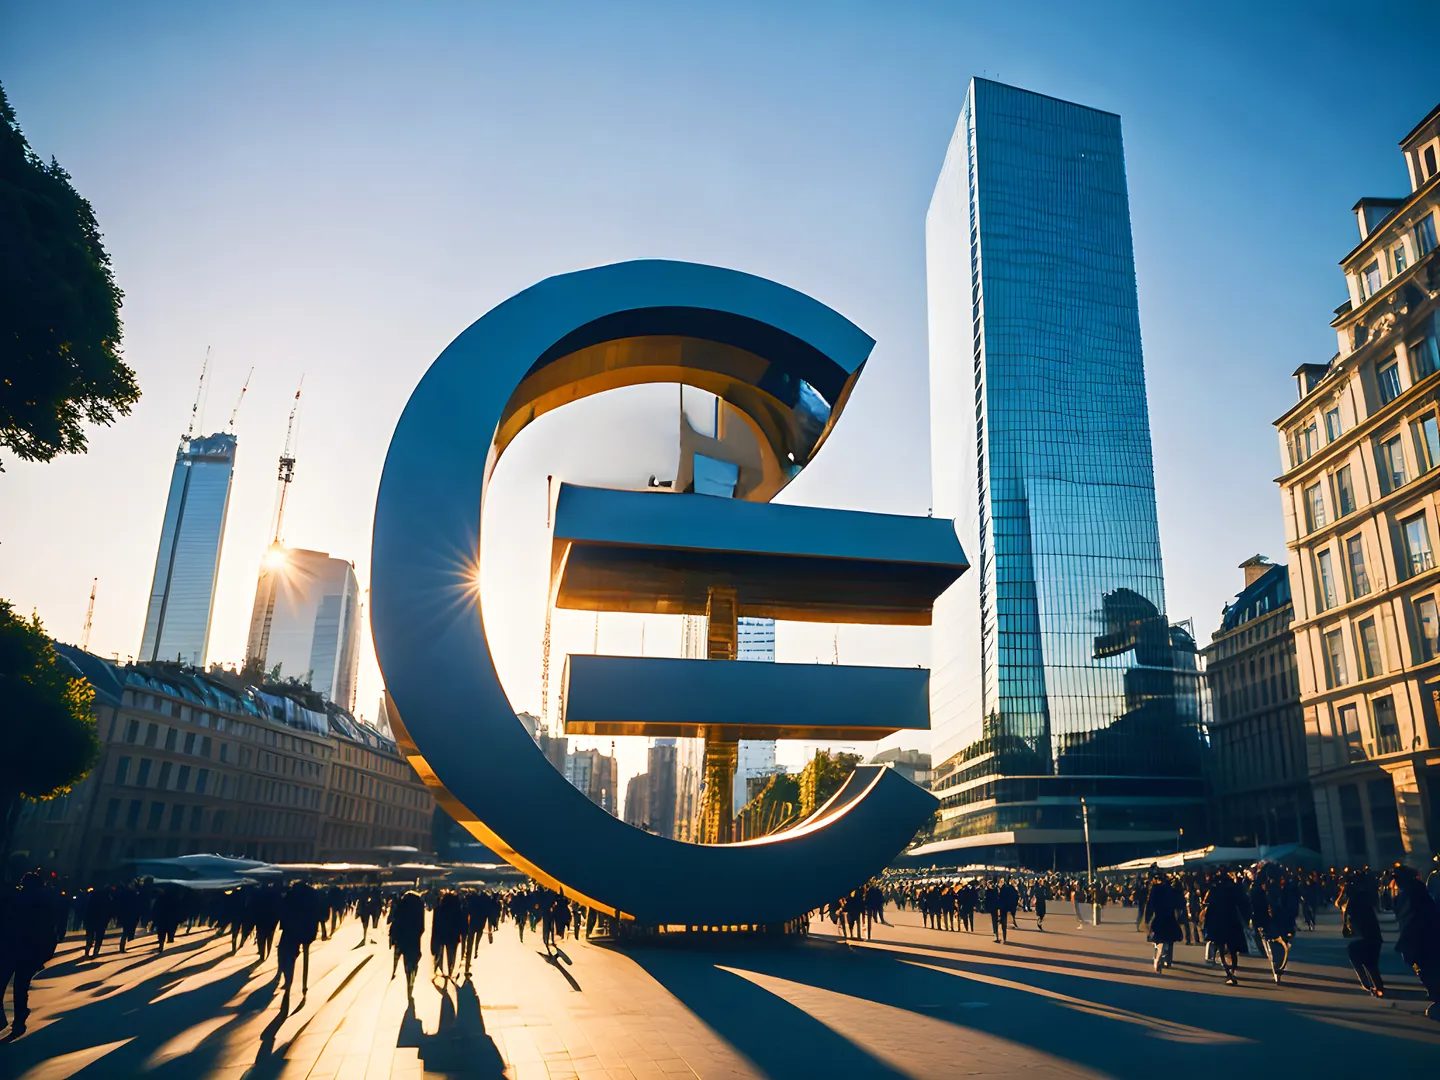 💶 Digital Euro Coming this Autumn?

---
GM, Web3Daily readers!
---
🌟 Glance at Today's Edition:

💶 Digital Euro can be rolled out as soon as in this current year (2023)

🏦 Central banks rushing to roll out their own CBDCs.

🕵️ Privacy concerns and programmability discussed in previous progress reports.

🗺️ Access, distribution aspects, and powerful functionalities.

💱 Digital euro to be accessible to individuals and institutions within the EU and selected third countries.

🚀 3000 euro limit for individual accounts; waterfall functionality for exceeding the limit.

💧 Digital euros can be transformed back into regular euros.

📲 QR code payments and possible physical digital euro card for offline peer-to-peer payments.

🌐 Intermediaries can offer optional services like recurring payments and conditional triggers.

🔗 ECB clarifies optional services aren't programmability in disguise.

💪 Digital Euro aims to avoid dependence on foreign currencies and privately issued digital currencies.

🌊 Euro stablecoins as a potential Plan B to ensure Euro's survival and support heavily indebted European countries.

---
💶 The Digital Euro Groundbreaking Journey
---

🏦 Central Banks in Frenzy: The Race for CBDCs 🤝

Picture this: it's a crisp morning, and the sun is just beginning to peek over the horizon, casting a warm glow on the bustling streets of the city. As I step into my favorite café, the scent of freshly brewed coffee fills the air, energizing me for the day ahead. I find a cozy corner seat by the window, where I can watch the world go by. As I sip on my coffee, I can't help but notice the excitement in the air—the Digital Euro! The news is abuzz with discussions about this groundbreaking development that promises to revolutionize the way we handle money. Curiosity piqued, I decide to delve deeper into this intriguing topic. Central banks around the globe are in a frenzy, racing to roll out their own Central Bank Digital Currencies (CBDCs). The Digital Euro, in particular, has become the talk of the town, sending ripples of anticipation across the financial landscape.

As I dig into the origins of this digital revolution, I find that the journey began back in October 2021, when the European Central Bank (ECB) first started investigating the possibility of a Digital Euro. Since then, they've published two progress reports that have left the world in awe of what's to come. The concept of a digital currency issued and regulated by a central bank may seem like something out of a sci-fi movie, but it's quickly becoming a reality.

🤔 Unveiling the True Nature: Privacy vs. Programmability 🔄

As the story unfolds, a sense of mystery surrounds the true nature of the digital euro. Is it merely a vessel for secure transactions, prioritizing individual privacy above all else? Or does it harbor secrets, veiled in the shadows of its programmability? 🤔 

The second progress report shed new light on the digital euro's capabilities, claiming it would not be programmable. The notion that users would have no control over their money seemed to alleviate some privacy concerns. However, the skepticism that lingers suggests that this narrative may not be as straightforward as it appears. And remember that privacy here means that private actors won’t see our data, but the government for sure will. 

The intrigue intensifies, and we are left with more questions than answers. But, hold on, the ECB wants to set the record straight. These optional services are not the dreaded programmability in disguise. No, no! 🚫 Apparently, it's all about conditional payments and not programmable money. The intermediaries are here to enhance your experience without compromising the digital euro's privacy and security. Do you trust them or do you think that’s all just a way to disguise their true intentions?

📈 The Third Progress Report: Unleashing the Digital Euro's Features 🗺️

Intrigued by the latest developments, I eagerly immerse myself in the ECB's third progress report on the Digital Euro. It's like peering into a treasure chest of possibilities, with three crucial categories of features waiting to be unveiled: digital euro access, distribution aspects, and a plethora of services and functionalities.

🚧 Access to the Digital Euro: A Global Impact? 🗺️

The prospect of gaining access to the digital euro, initially focusing on individuals and institutions within the EU, opens up a world of potential for seamless transactions and financial inclusivity.

The EU isn't content with keeping the digital euro confined within its borders. No, it's feeling adventurous and daring. The digital euro is spreading its wings beyond the EU's boundaries, with the potential to be used in selected third countries. 🌍💱 This bold move is like a ripple in a vast ocean, and its waves could challenge the dominion of the mighty US dollar on the international stage!

🚚 Distribution: QR Code Payments and Digital Euro Card 💳

Next, I venture into the world of distribution aspects, where QR code payments and offline peer-to-peer transactions seem like something out of a futuristic utopia/dystopia. Could we soon be using QR codes to make payments effortlessly? And the idea of a physical digital euro card seems both exciting and scary!

The authors of this report have a vision, one where QR codes become the language of the digital euro's transactions. Just imagine, my friends, a world where most digital euro payments are effortlessly made through a simple scan. It's a step towards financial efficiency and could open up a realm of exciting possibilities. Imagine a world where your smartphone becomes your gateway to financial transactions. 

A world where QR code payments are the norm, seamlessly connecting you with merchants, friends, and even strangers for offline peer-to-peer payments. As we venture into the realm of distribution aspects, the European Union envisions just that—a future where QR code payments with the digital euro are as ubiquitous as the air we breathe. Both scary and exciting vision, though in many countries our digital banking apps provide us with enough functionalities to enjoy a similar state of payments. 

The catch here is, that credit cards can’t be as easily integrated into the future potential CBDC system as it would be with QR codes. In my opinion this change is a preparation for much bigger changes down the line leading towards the real financial revolution that central banks want to enforce. 

But there's more! The report tantalizes us with the idea of a physical digital euro card. Yes, you heard that right! Imagine holding in your hand a tangible representation of the digital currency—a card that can be used for offline peer-to-peer transactions. A tangible representation of the digital revolution, this card could bridge the gap between the virtual and physical world, making your digital euros accessible in brick-and-mortar establishments. It's a significant step towards a more connected world, where digital and traditional forms of payment converge.

💧 Onboarding the Digital Euro Train: The 3000 Euro Limit 💸

As I continue my research, I find that onboarding the digital euro train is as easy as opening a regular bank account. 🏦🚀 The prospect of becoming a part of this digital revolution is captivating, but the 3000 euro limit (a sign of a future dystopian limits on how much you will be able to spend each month?) on individual accounts catches my attention. However, the “waterfall functionality”, transforming digital euros into regular euros when the limit is reached, promises a smooth experience for users.

💪 The Power of Intermediaries: Endless Possibilities 💡

Now, hold your breath for the final chapter—powerful functionalities offered by the Digital Euro. The authors share a list of optional services that intermediaries can provide. These services include recurring payments and conditional triggers, all aimed at making the digital euro even more versatile and user-friendly. Now, as we turn our attention to the power of intermediaries, a world of endless possibilities opens up before us. These financial wizards will build upon the digital euro's advanced functionalities to offer optional services that cater to your unique needs and preferences. Picture this—you sign up for recurring payments for your monthly expenses, and conditional triggers ensure your bills are paid on time without lifting a finger.

🚀 Driving Force Behind the Digital Euro: Independence 🌐

As I reflect on the driving force behind this digital currency, I understand the ECB's motivation to avoid dependence on foreign currencies and privately issued digital currencies. 💪💶 They aim to protect their sovereignty and ensure the Euro remains a formidable player in the global financial arena. And yet I can’t stop feeling like this is a first step of losing our financial freedom as Europeans (cheers to readers from outside the EU!).

In the midst of all these developments, I can't help but wonder about the future of finance. Will the digital euro become the norm, coexisting with traditional currency, or will it lead to an entirely cashless society? Is the World Economic Forum agenda of “you’ll own nothing and be happy” a part of this move? The possibilities are endless, and the outcome of this journey into the Digital Euro's realm remains to be seen.

💱 Embracing the Digital Euro: Businesses in the Game 🏢

As we immerse ourselves deeper into the report's pages, we uncover the second captivating chapter—distribution aspects of the Digital Euro. The European Central Bank envisions a world where businesses of all sizes, big and small, embrace the digital currency. A digital euro scheme is in place, mandating businesses to accept this futuristic currency as a payment option. Moreover, businesses will have the power to pay their employees using the digital euro, creating a seamless financial ecosystem. Behind this innovative initiative lies a powerful driving force—the desire for independence. The digital euro aims to protect the EU from reliance on foreign currencies and ward off any dominance from privately issued digital currencies. With the digital euro in its arsenal, the ECB stands firm, safeguarding the Euro's sovereignty and maintaining control over its financial destiny. It's a strategic move, born from a vision of preserving the EU's financial integrity.

🌊 Plan B: Euro Stablecoins for Strategic Alternatives 🚀

But as we navigate through these uncharted waters, there's chatter about a Plan B—the Euro stablecoins. 🌊🚀 These stablecoins, backed by EU government debt, offer an alternative route to ensure the Euro's survival while providing a lifeline to heavily indebted European countries. It's a strategic move to keep the ship steady in turbulent financial seas.

💶 Digital Euro in Autumn? 🍂

In fact the digital Euro can be rolled out as soon as in autumn of 2023. Current project roadmap suggest so, but we will have to wait and see f they will deliver on time. Imagine how much chaos this change could entail. It’s really a dawn of the new era – a good or a bad one. I wonder how crypto markets will behave when faced with such a news. Normally the autumn brings us some bullish momentum and this might severely impact the cryptocurrency market performance. Take a look at the projects roadmap:
https://media.licdn.com/dms/image/D5612AQGrAxc6w_zPoA/article-inline_image-shrink_1500_2232/0/1664719507354?e=1695254400&v=beta&t=7kEwBxfd9rlLIvhogUBGsKQHOeD_2VkBsQCkSNISNy8 

☕ The Curious Minds: Uncharted Waters Ahead 🕵️

As I sit in that café, sipping my coffee, I can't help but wonder about the twists and turns that lie ahead. Will the Digital Euro maintain its steadfast commitment to privacy, or will it reveal its programmable nature in the end? Will the Digital Euro revolutionize the global financial order, or will it face challenges and hurdles along the way? Is that the beginning of the end or is there still some hope that our freedom won’t be taken away and that we won’t experience a Big Brother watching over us in the future? Only time will tell, but one thing is certain—the journey into the Digital Euro's past has left us all captivated and hungry for more. As investors, these developments are essential to keep an eye on, for they could shape the financial landscape in unprecedented ways. The digital euro is not just a currency; it's a game-changer that opens up a world of limitless possibilities.

---
🔍 Action Items and Next Steps
---

1️⃣ Stay tuned for updates on the ECB's progress and the finalized design of the digital euro.

2️⃣ Keep an eye on the onboarding process and potential limitations for individual and institutional accounts.

3️⃣ Follow the developments on QR code payments and the possible introduction of a physical digital euro card.

4️⃣ Monitor how intermediaries leverage the digital euro's functionalities and the scope of their optional services.

5️⃣ Be aware of the potential strategic alternatives, such as euro stablecoins, and how they might impact the Euro's future.

---
📣 Join the Conversation! 🗣️
---

I am eager to hear your thoughts, insights, and experiences regarding this pressing issue. Let's engage in a vibrant discussion together! In addition to publishing this edition of the newsletter, I have also created a LinkedIn post where we can all discuss the developments and news covered in this edition. If you are eager to join the conversation, don't be shy! Feel free to check out my LinkedIn profile and comment on the post:

Let's connect on LinkedIn!

 

Web3Daily now has a few additional social media accounts. Follow and engage in a more casual style on these platforms:

Follow me on Twitter!

Follow me on Medium!

Follow me on Mirror!

Subscribe on Substack!

Follow me on Mastodon!

Follow me on Lenster!

Follow me Diamond!

Follow me on TikTok!

Subscribe on YouTube!

---
📣 Share the Knowledge!
---

Don't forget to share this newsletter with your crypto-savvy friends and colleagues. The more, the merrier! Let's build a community that stays informed, connected, and excited about the ever-evolving world of web3.

Thanks for being part of the Web3Daily family! Together, we'll navigate the exciting world of crypto and blockchain, one news byte at a time.

To stay connected and receive daily updates, make sure to connect with me on LinkedIn! Let's continue our journey to unlock the mysteries of web3 and embrace the future, hand in hand.

 

See you on the other side of the blockchain!

Wiktor Grzyb

Founder & Editor, Web3Daily